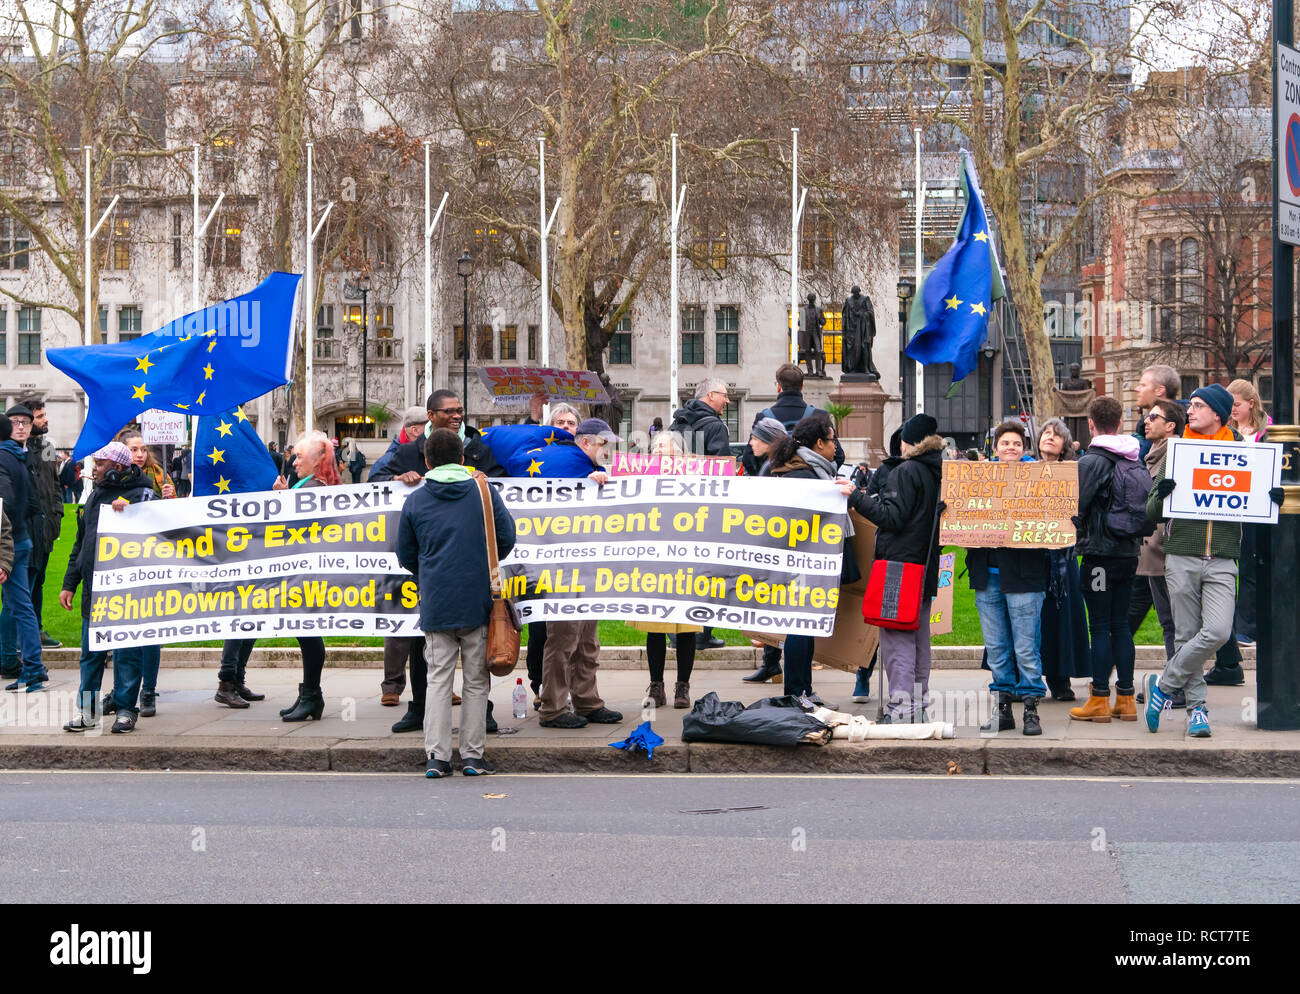 Protesters gather on Parliament Square prior to the meaningful vote (MV) on the Brexit Withdrawal Agreement Westminster, London UK January 15th 2019 Stock Photo